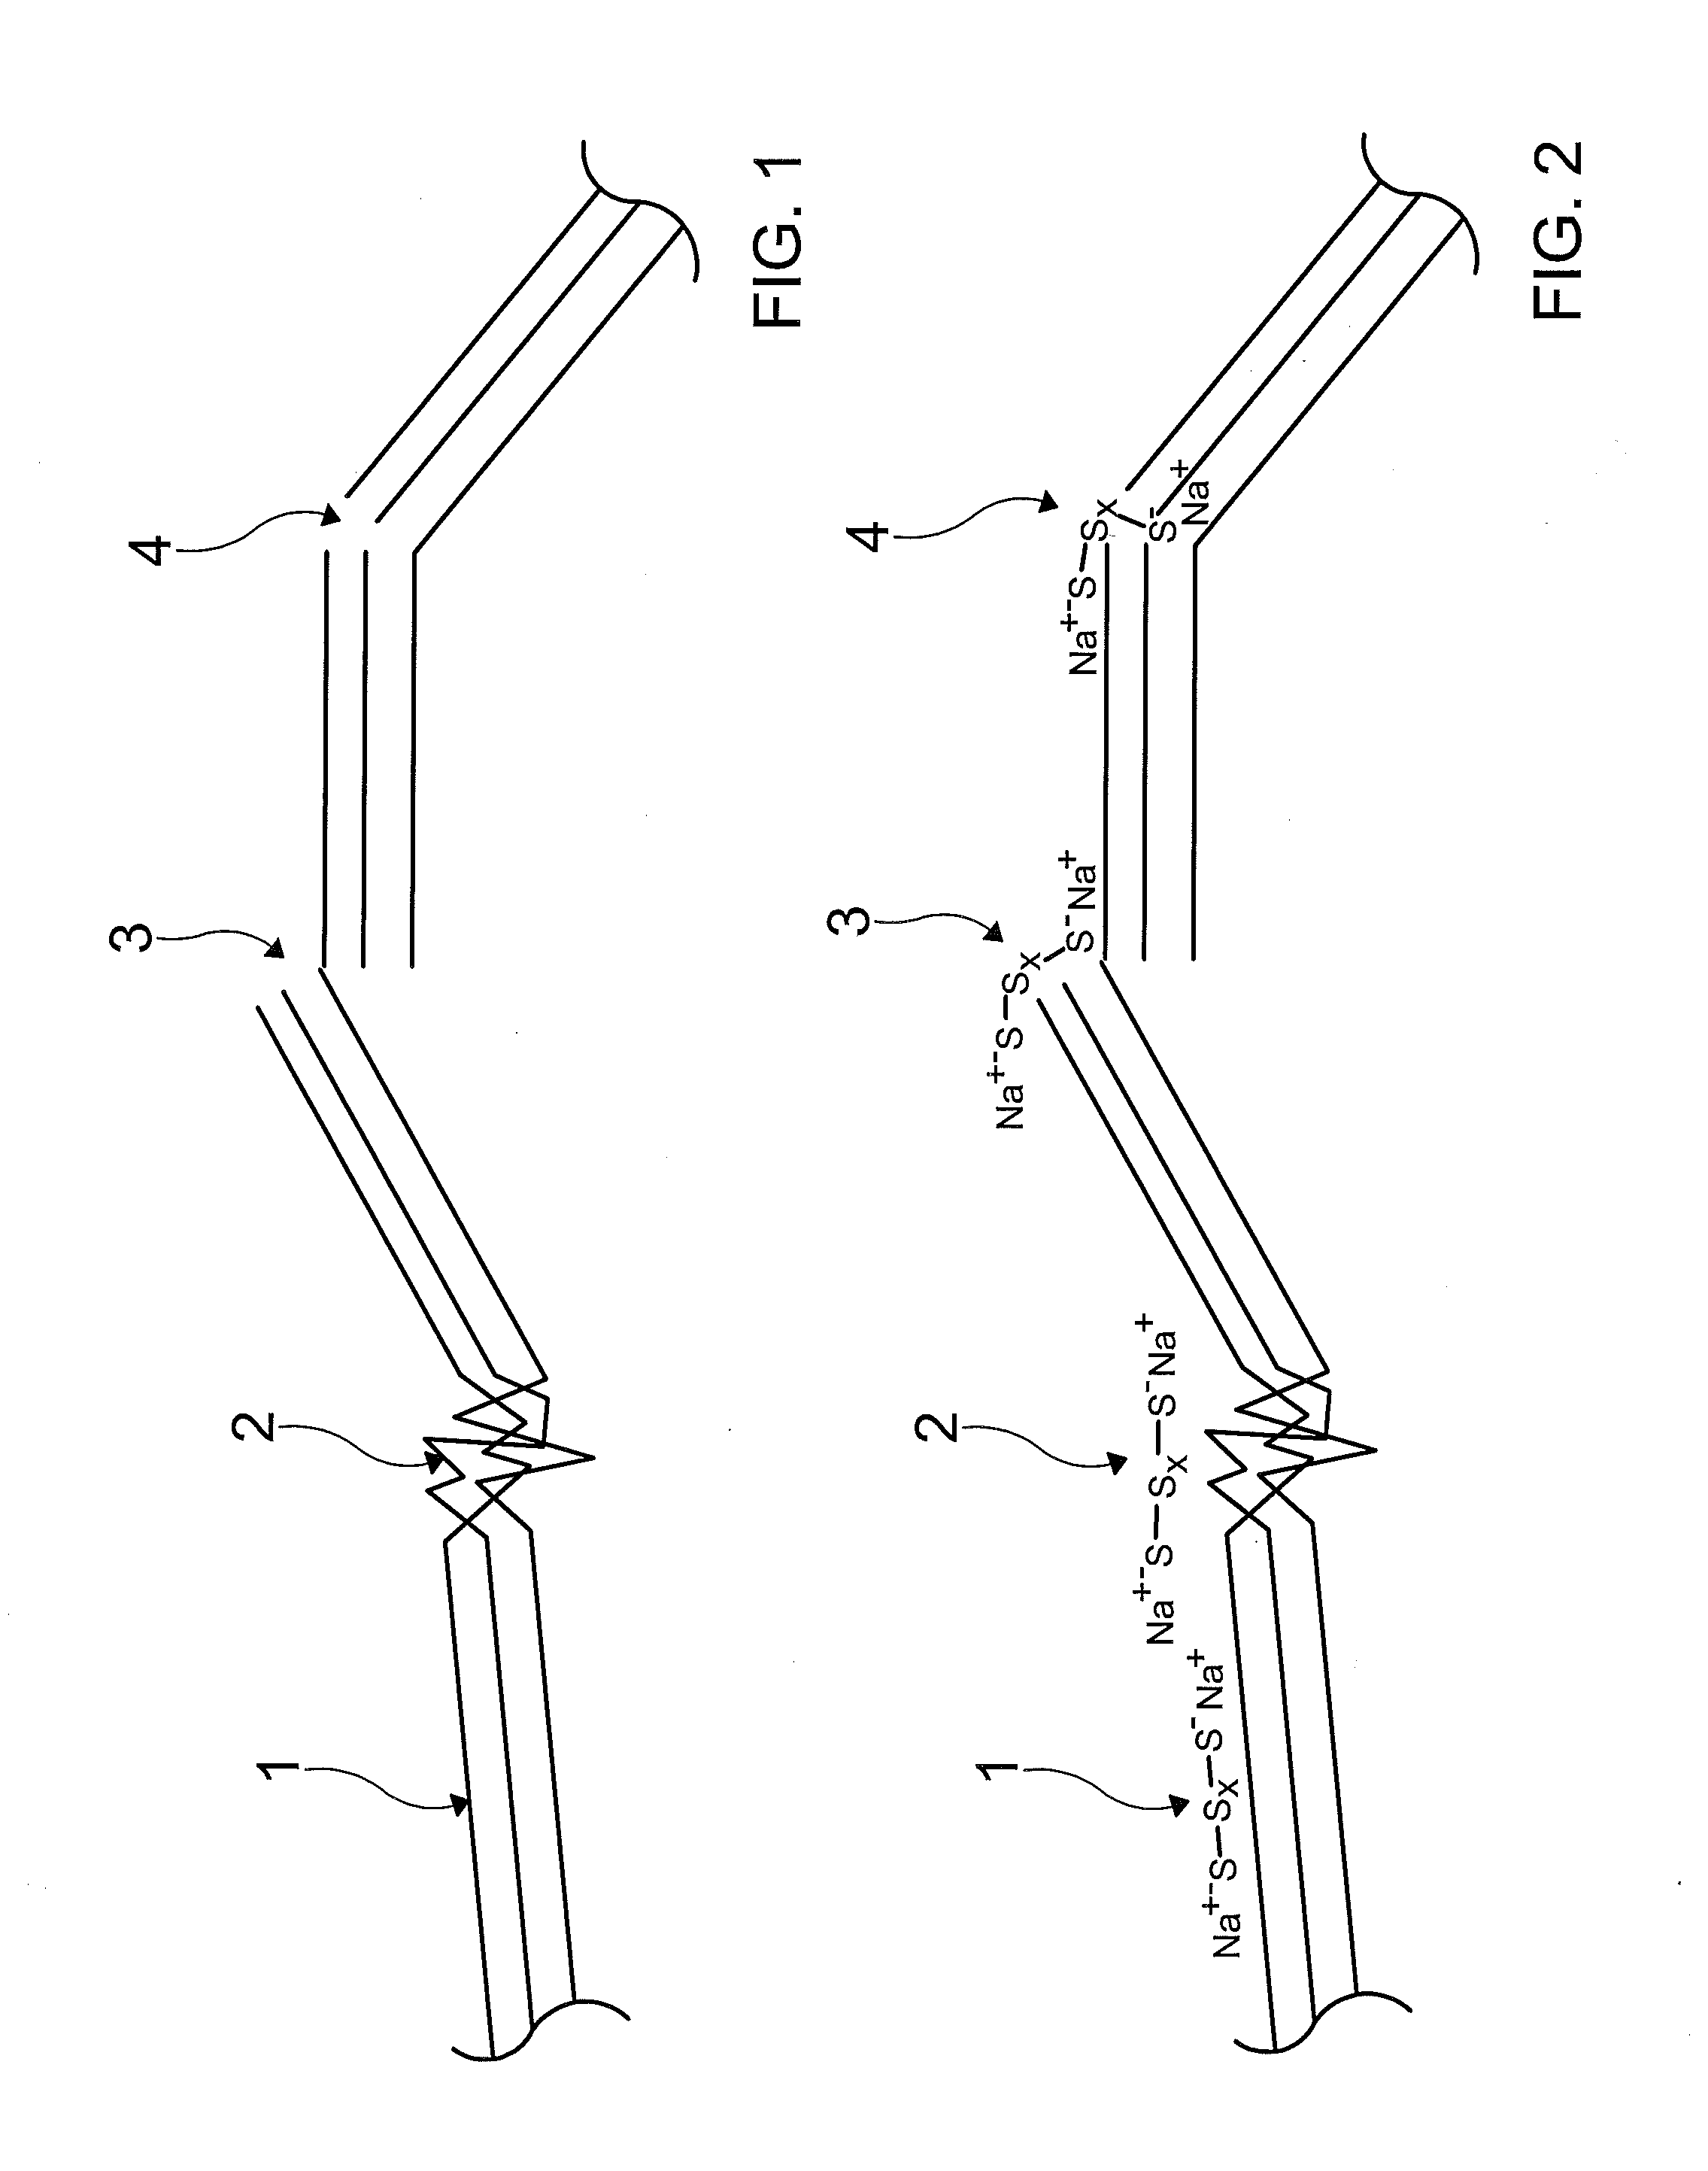 Polysulfide treatment of carbon black filler and elastomeric compositions with polysulfide treated carbon black